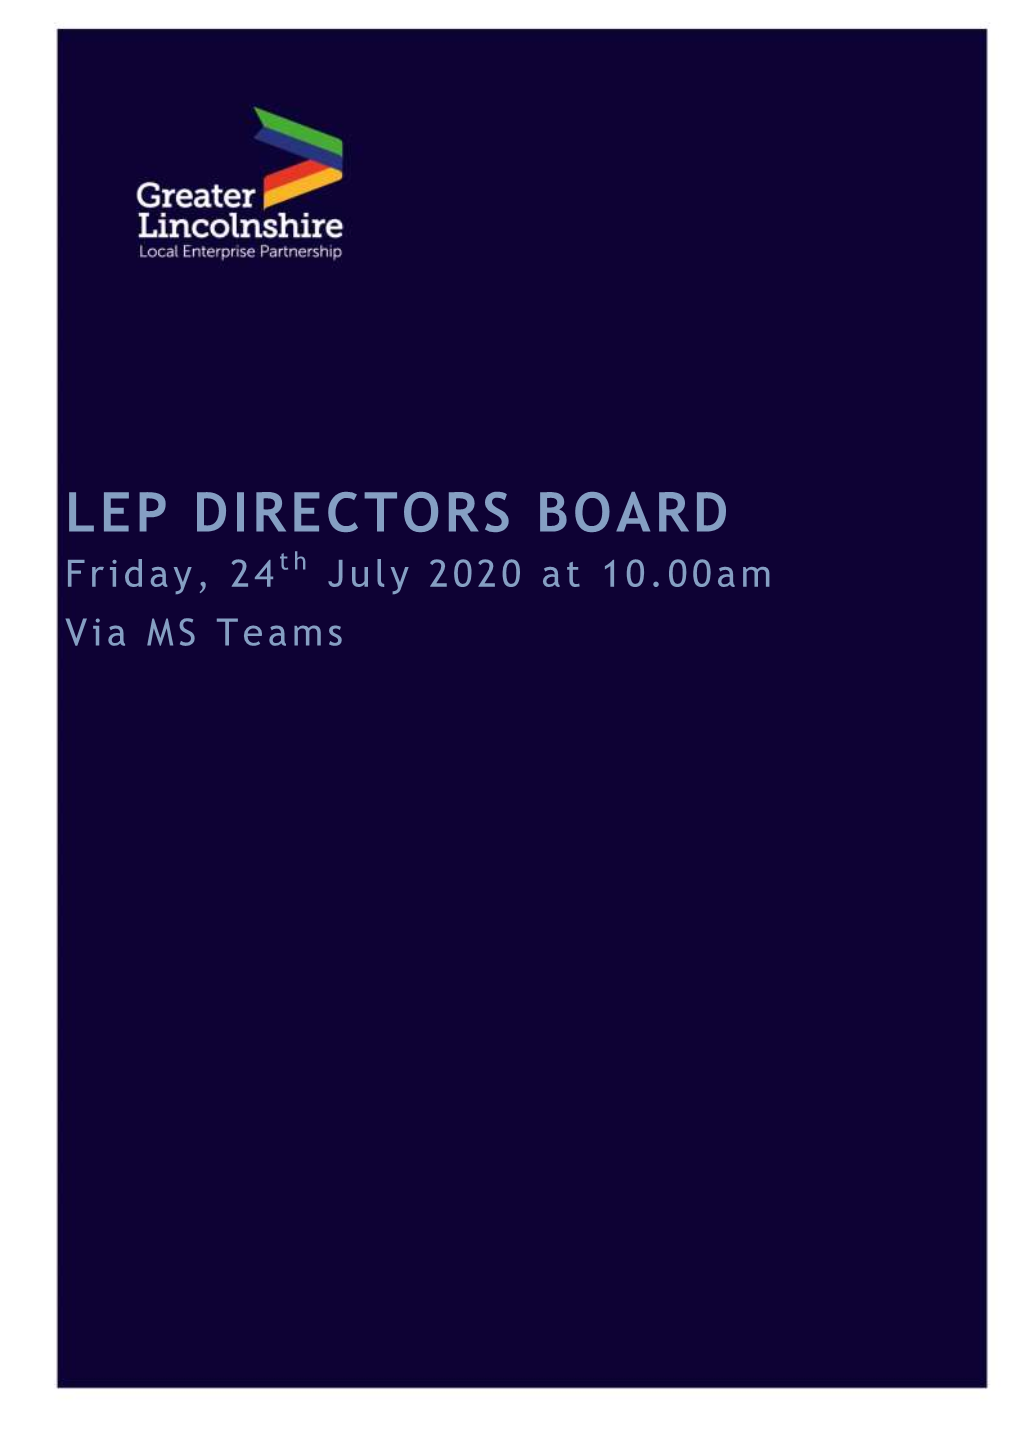 LEP DIRECTORS BOARD Friday, 24 Th July 2020 at 10.00Am Via MS Teams Paper 0 – Greater Lincolnshire LEP Board Agenda